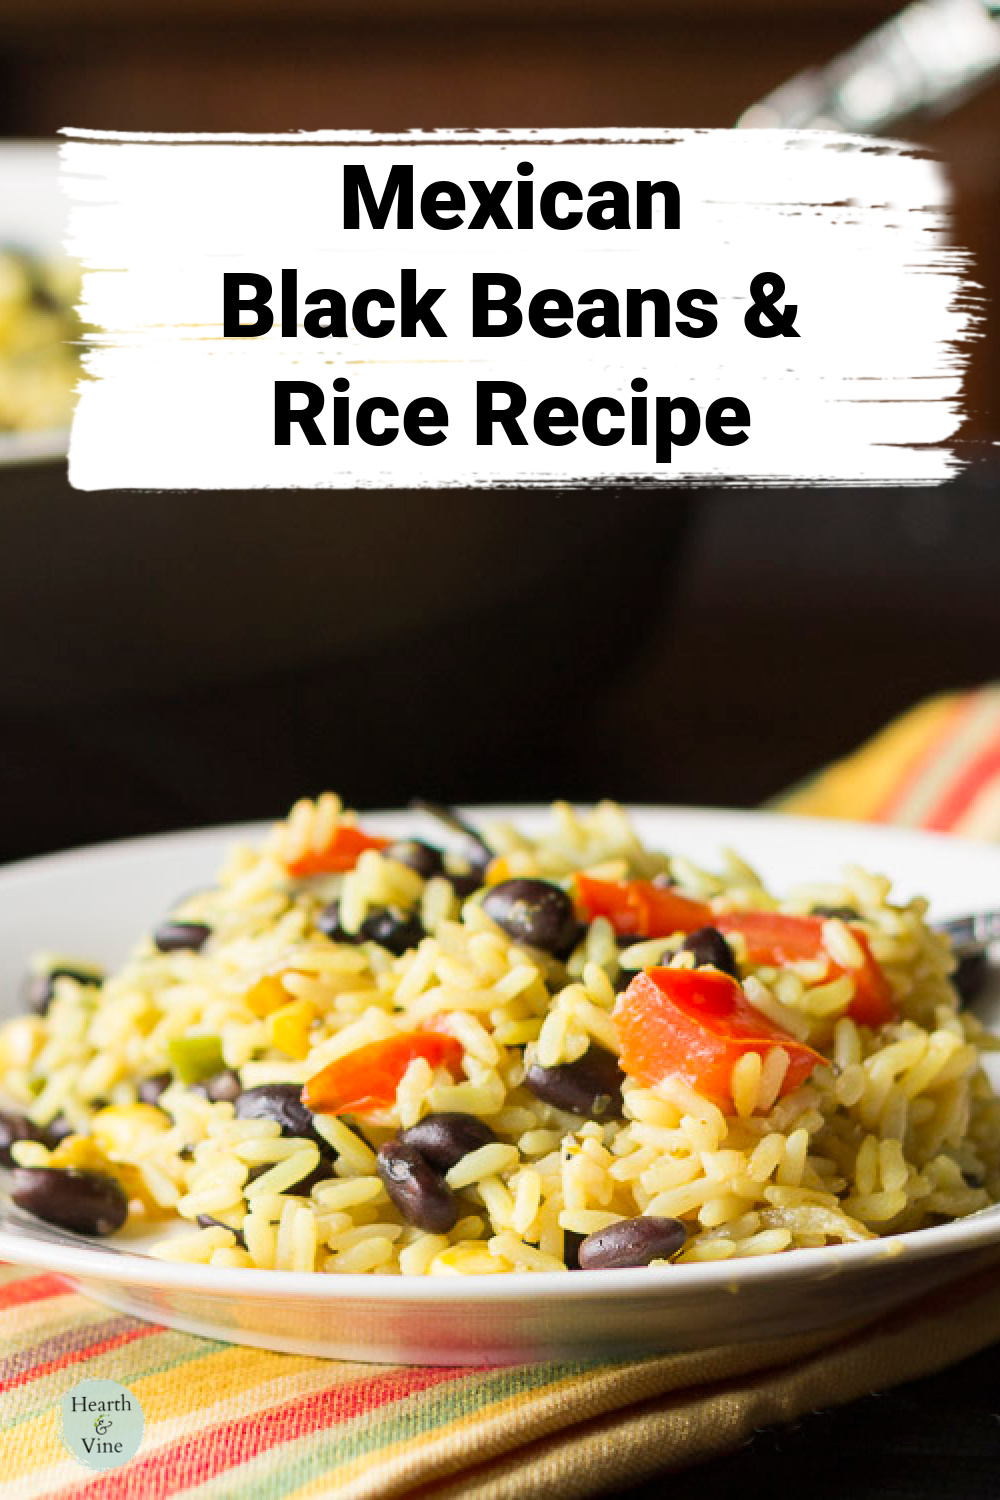 Plate of rice, black beans, peppers and tomatoes.